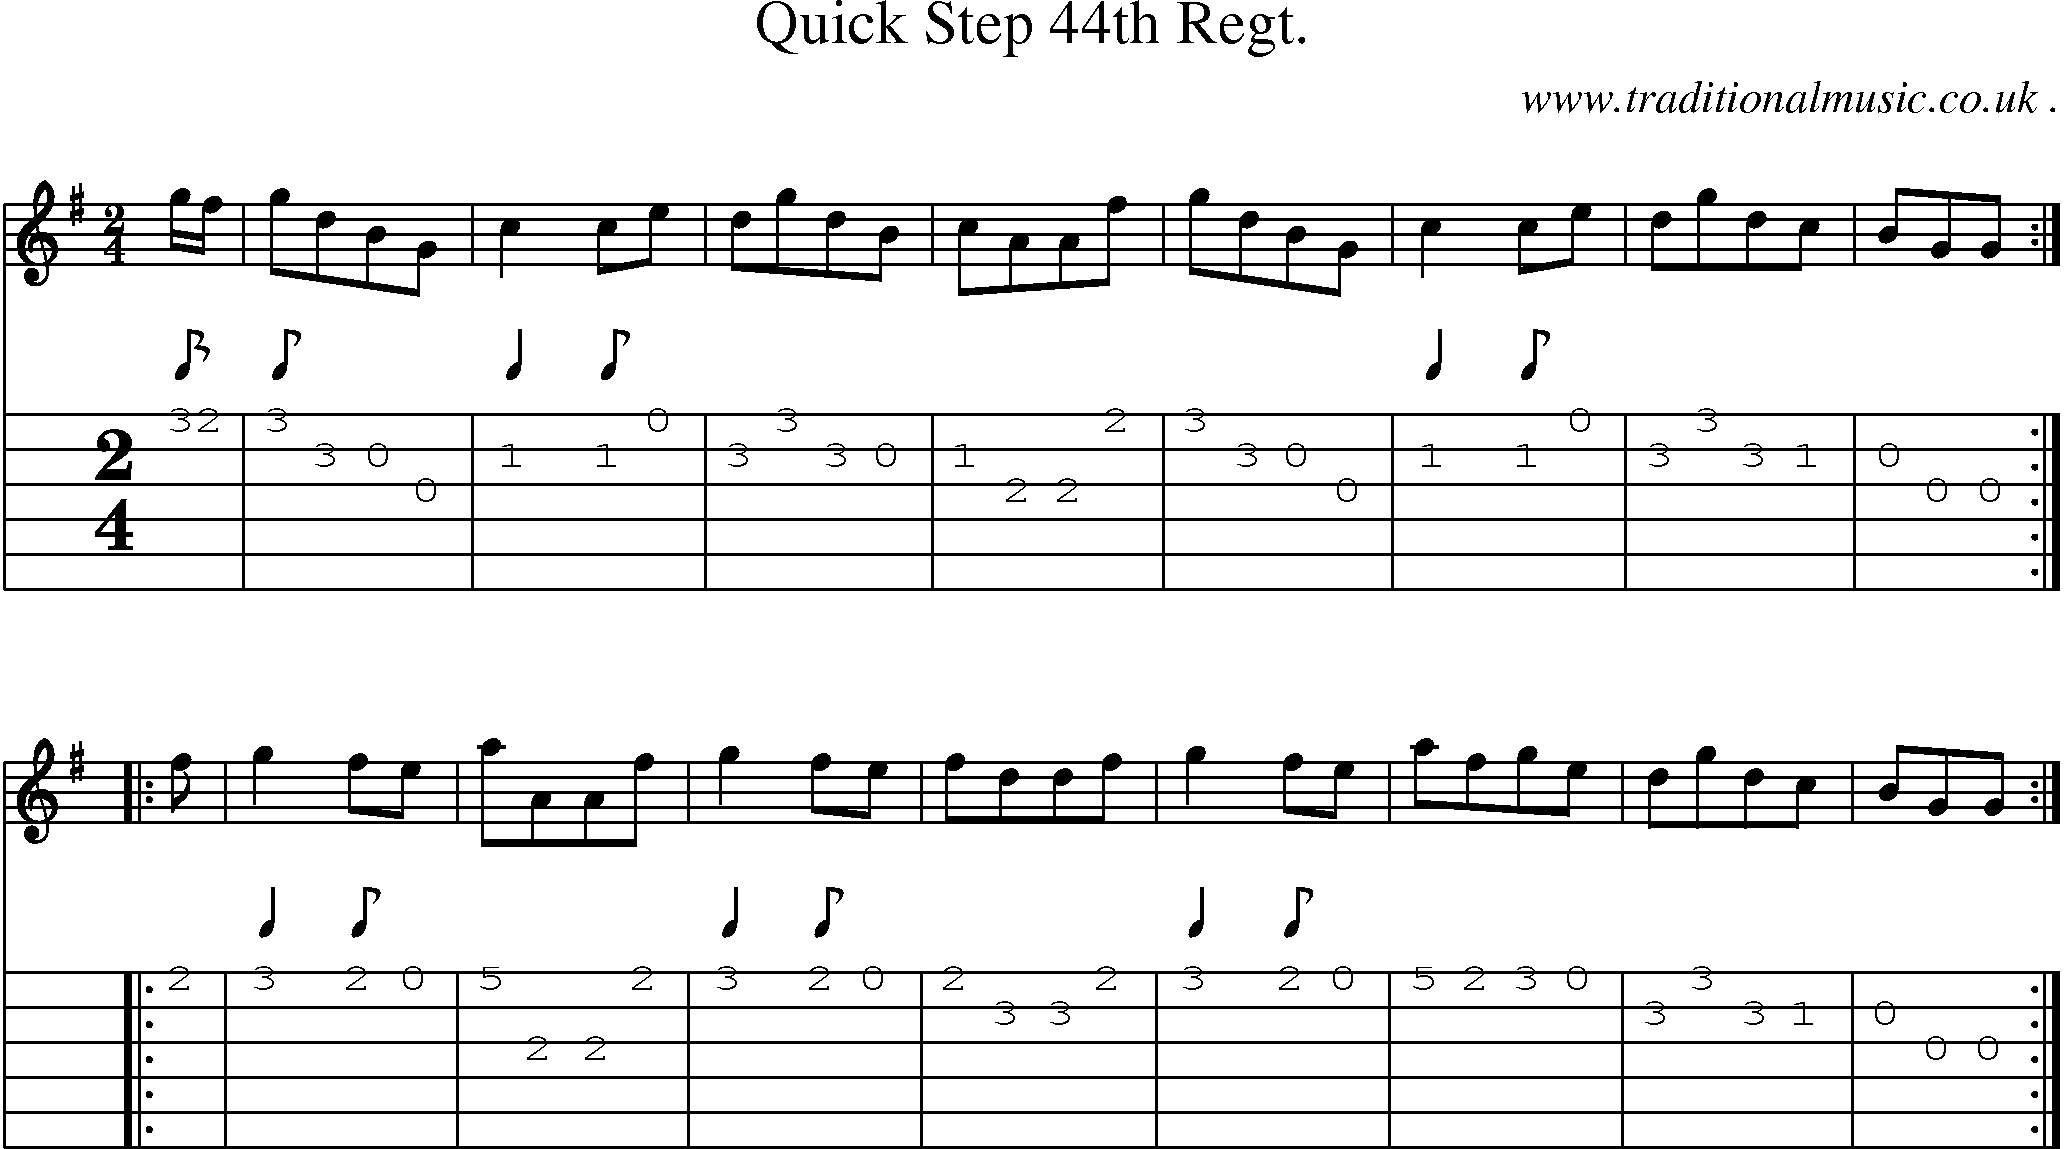 Sheet-music  score, Chords and Guitar Tabs for Quick Step 44th Regt